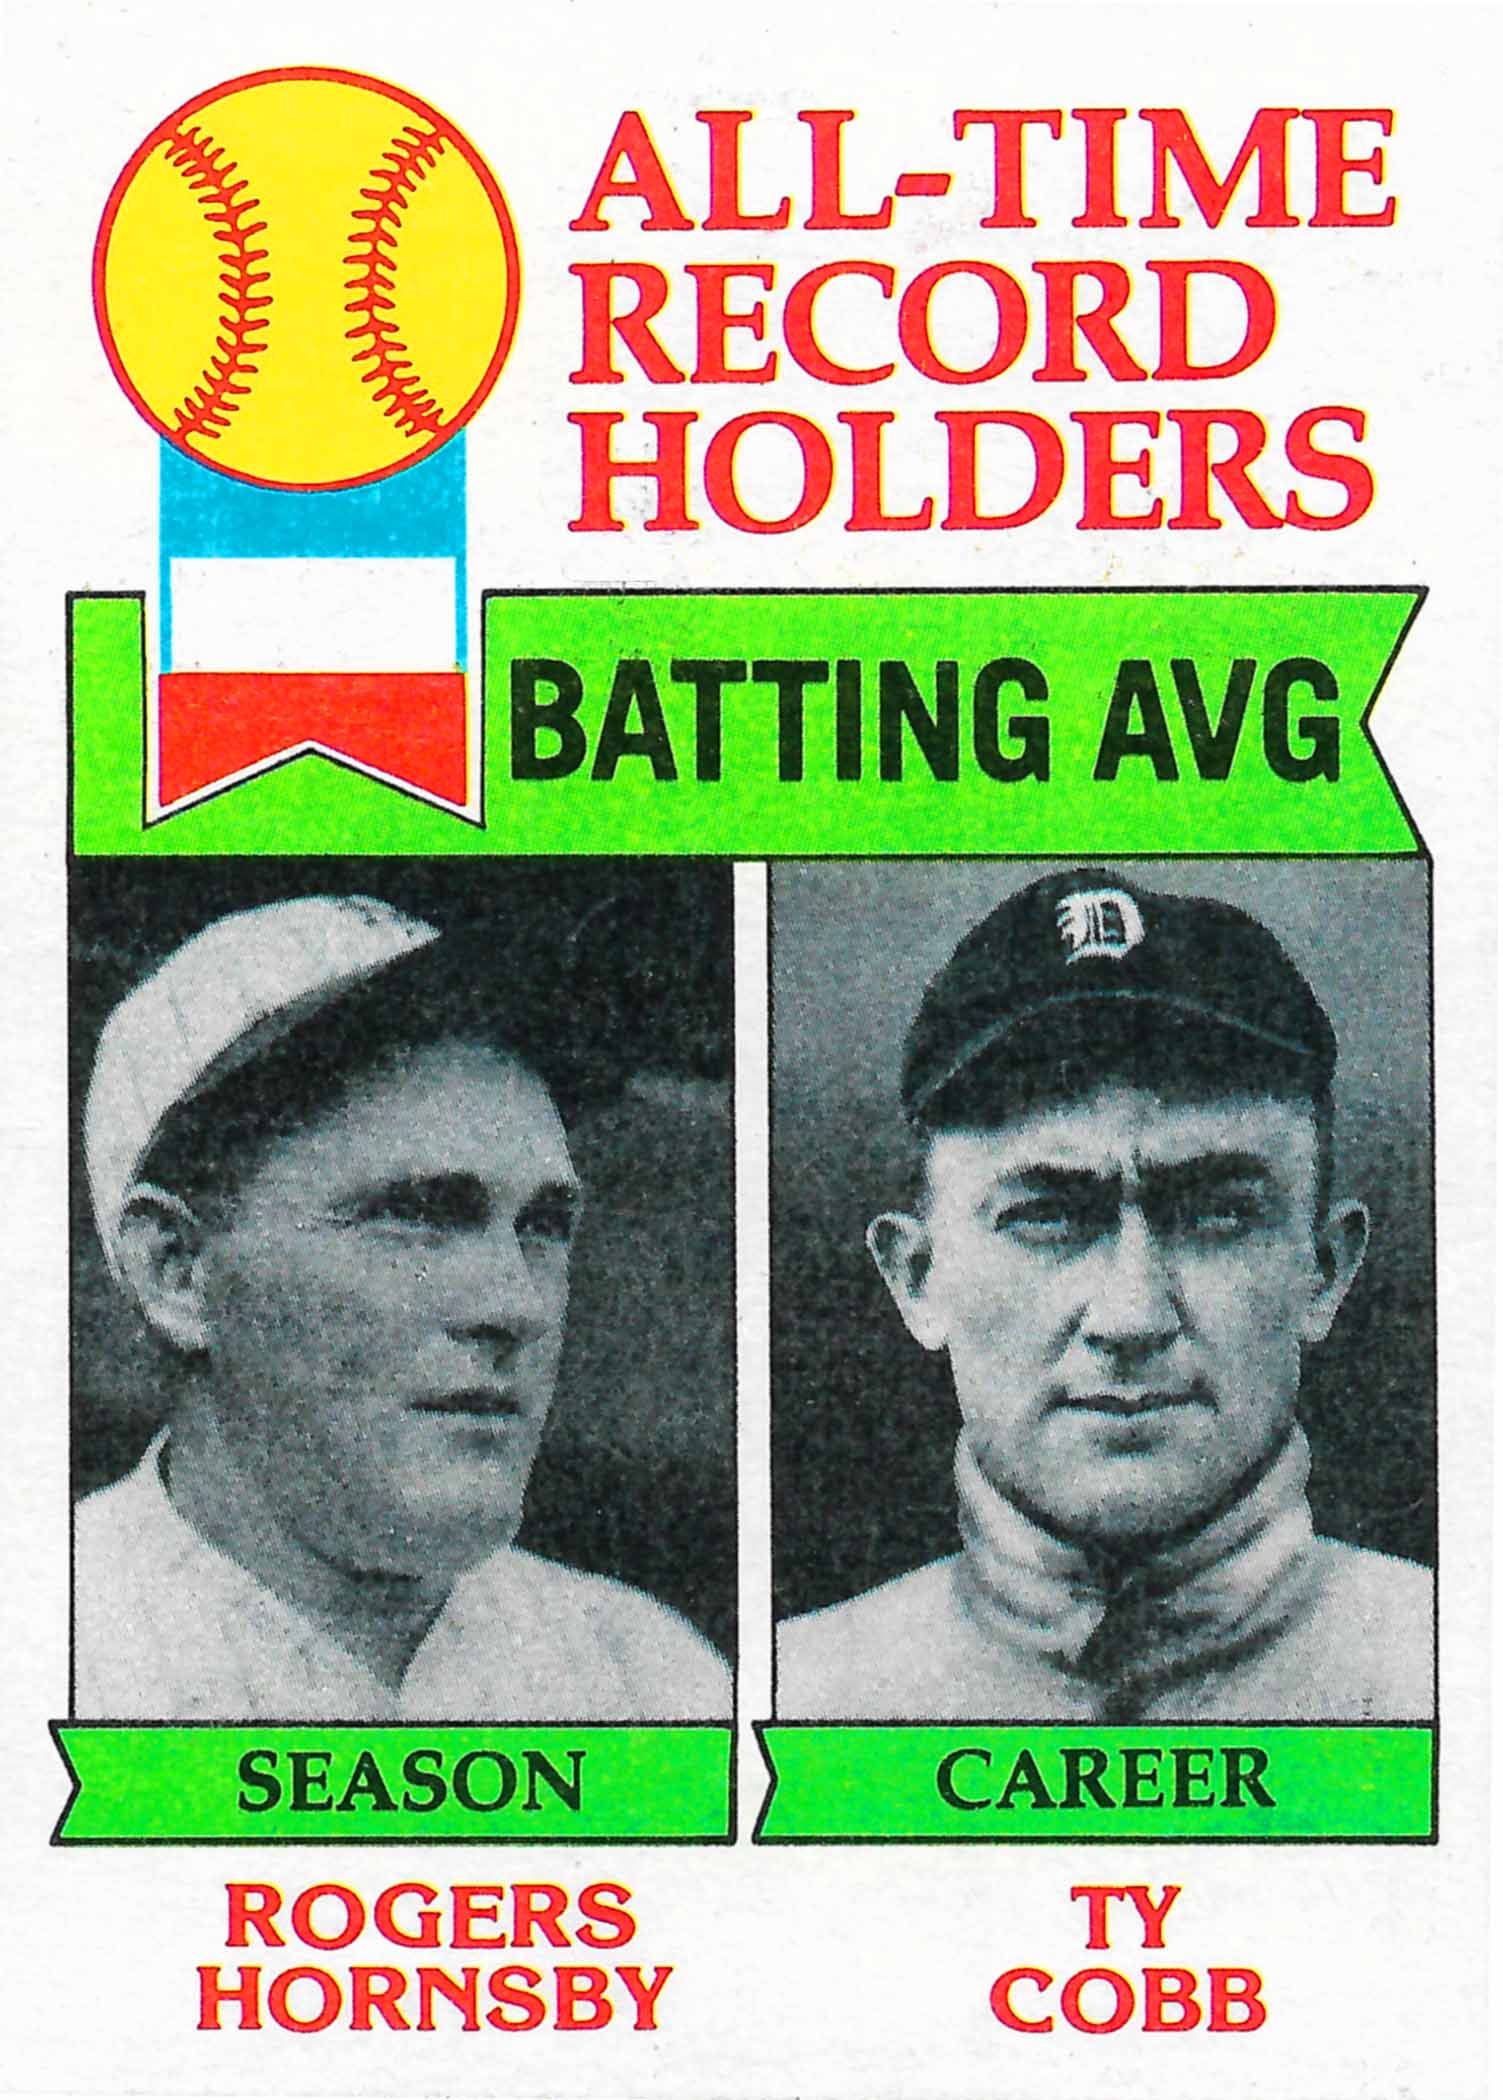 1979 Topps All-Time Record Holders